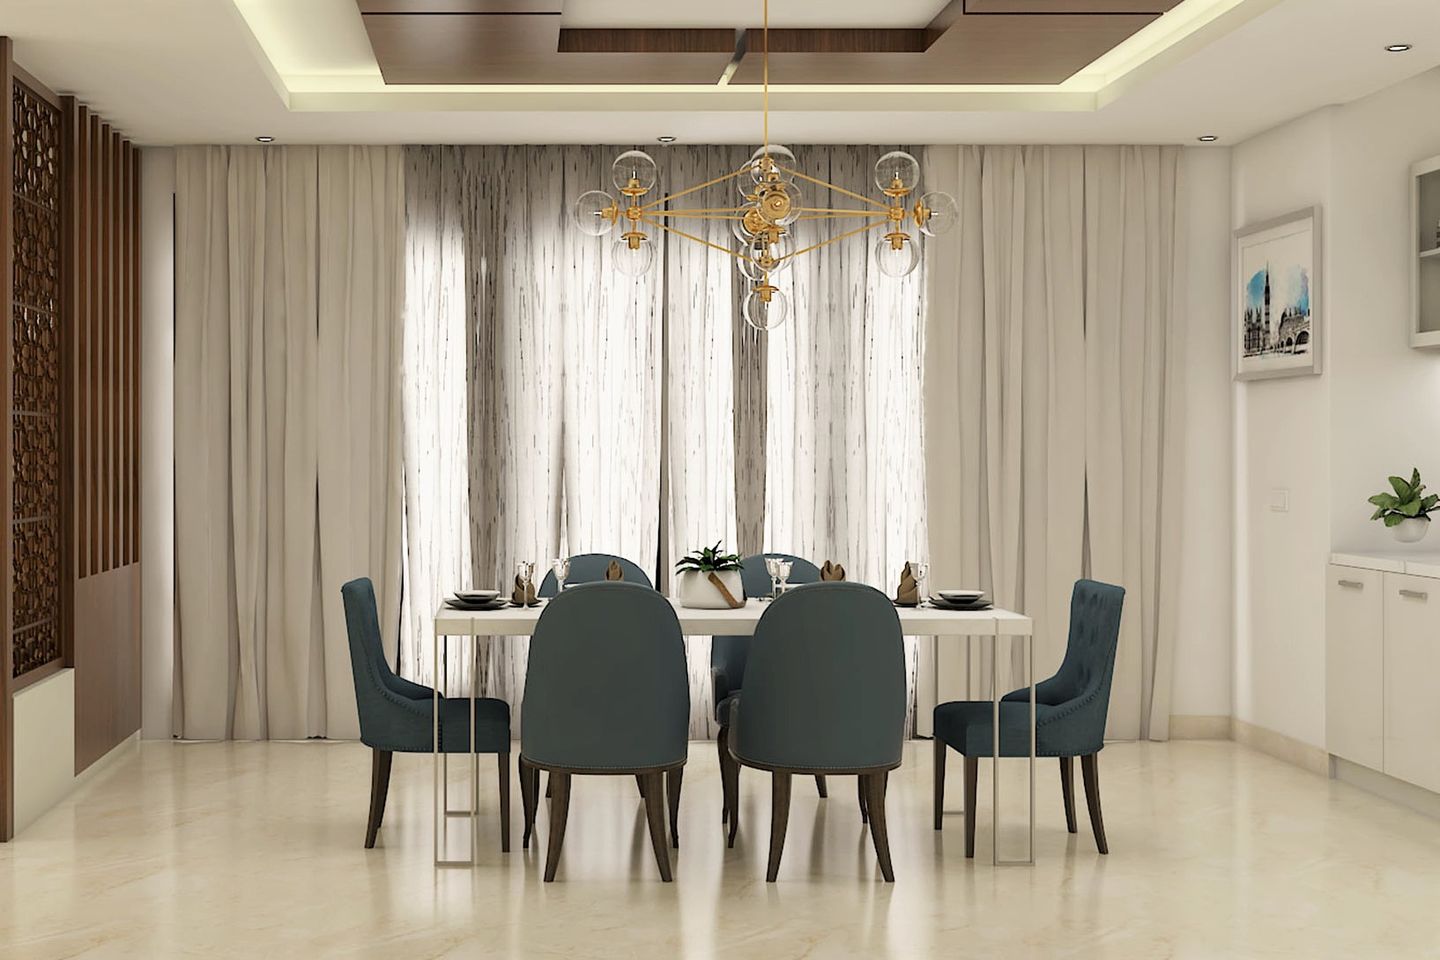 Modern Dining Room Flooring With Glossy Tiles